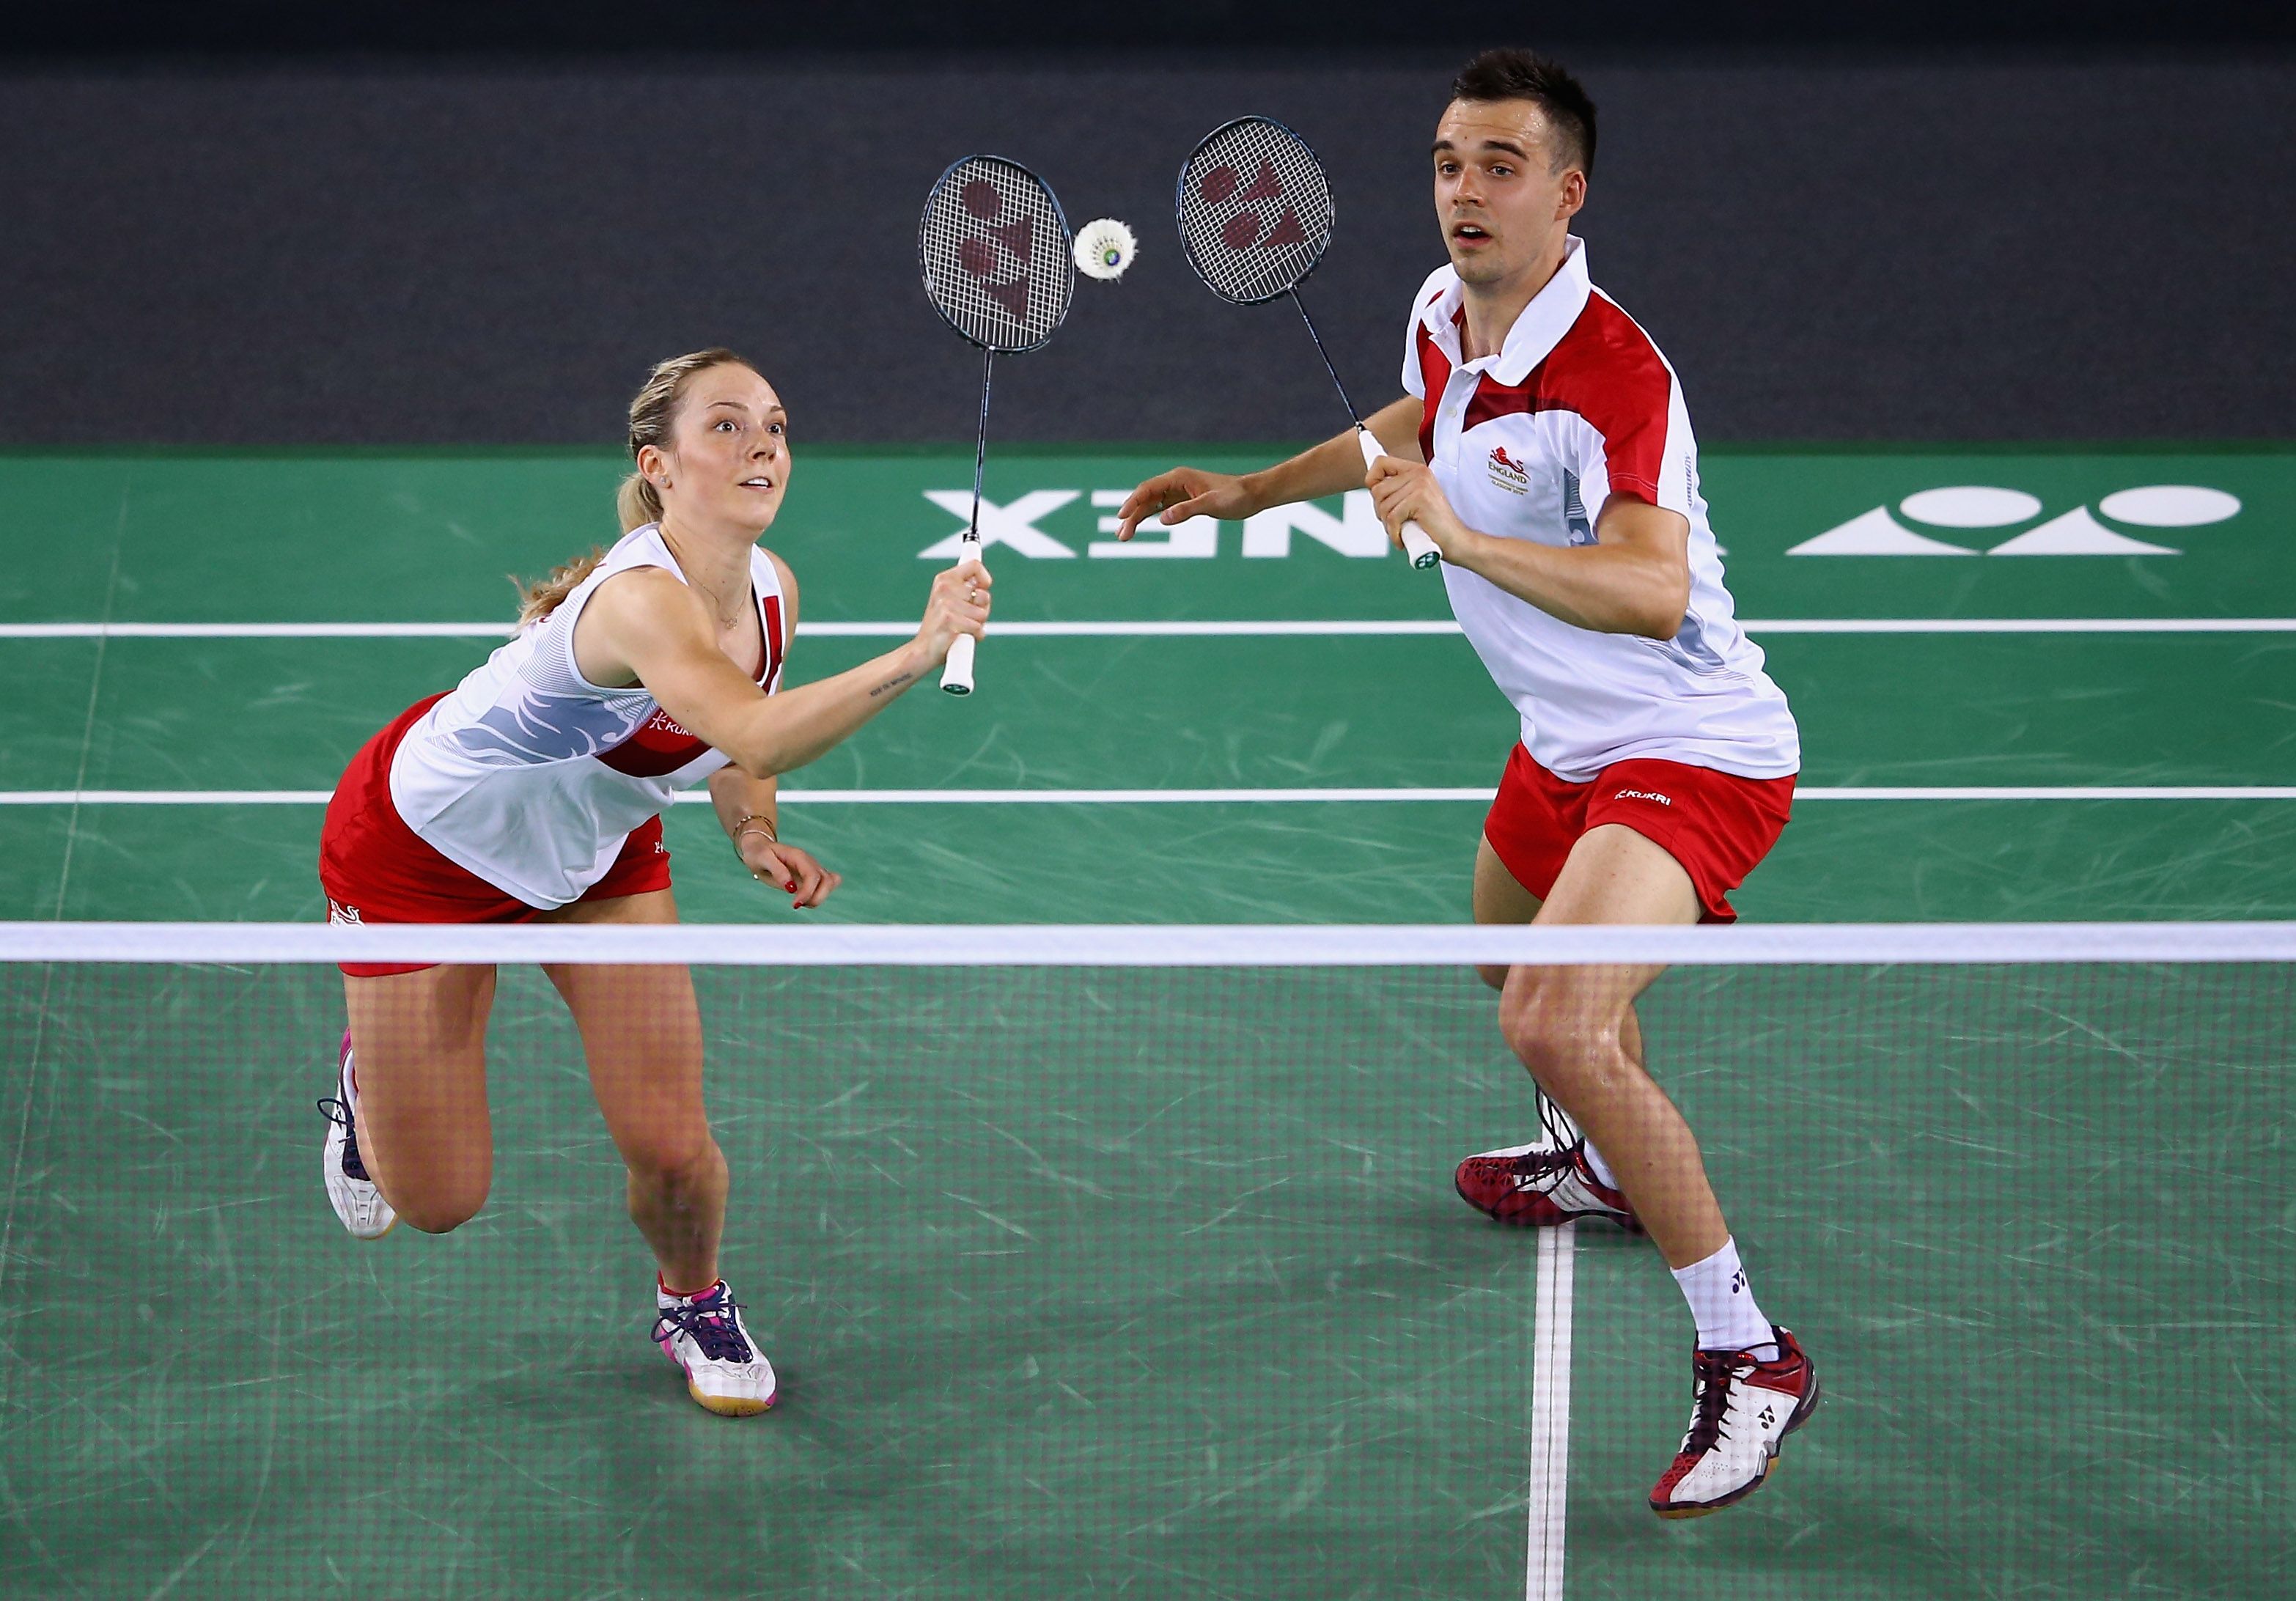 A Guide to Choosing the Best Badminton Flooring